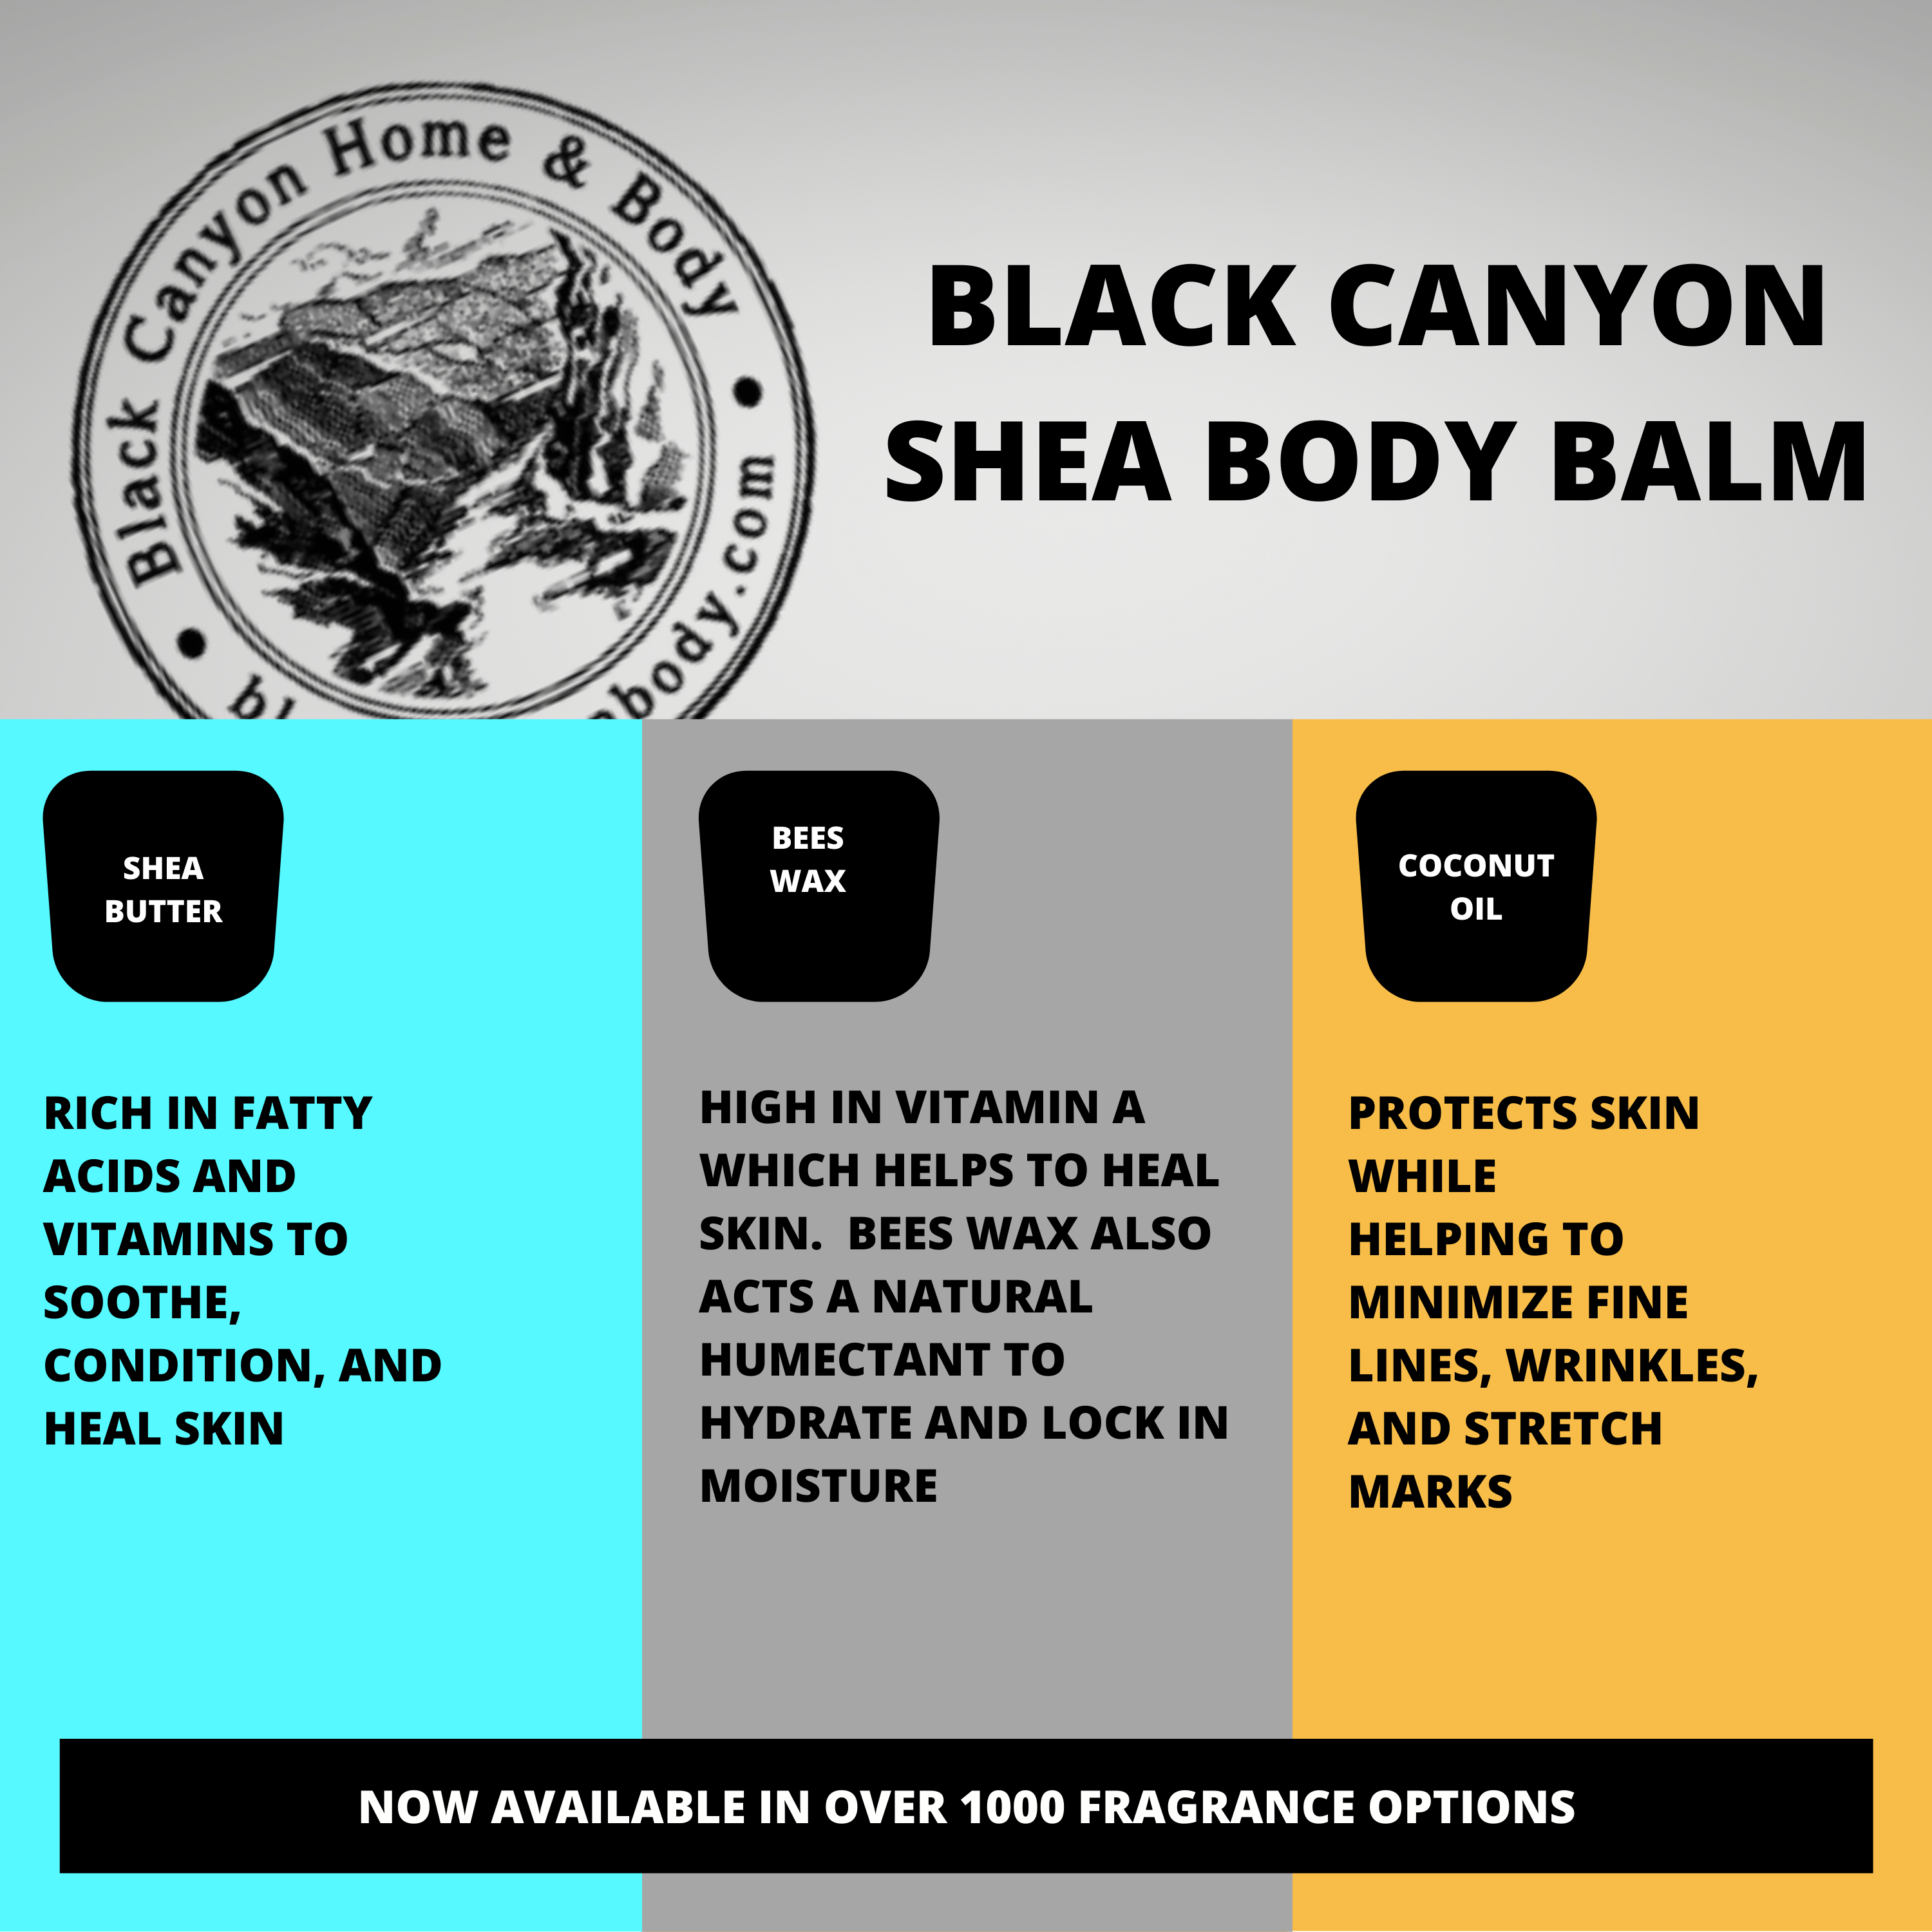 Black Canyon Black Apple Orchard Scented Natural Body Balm with Shea